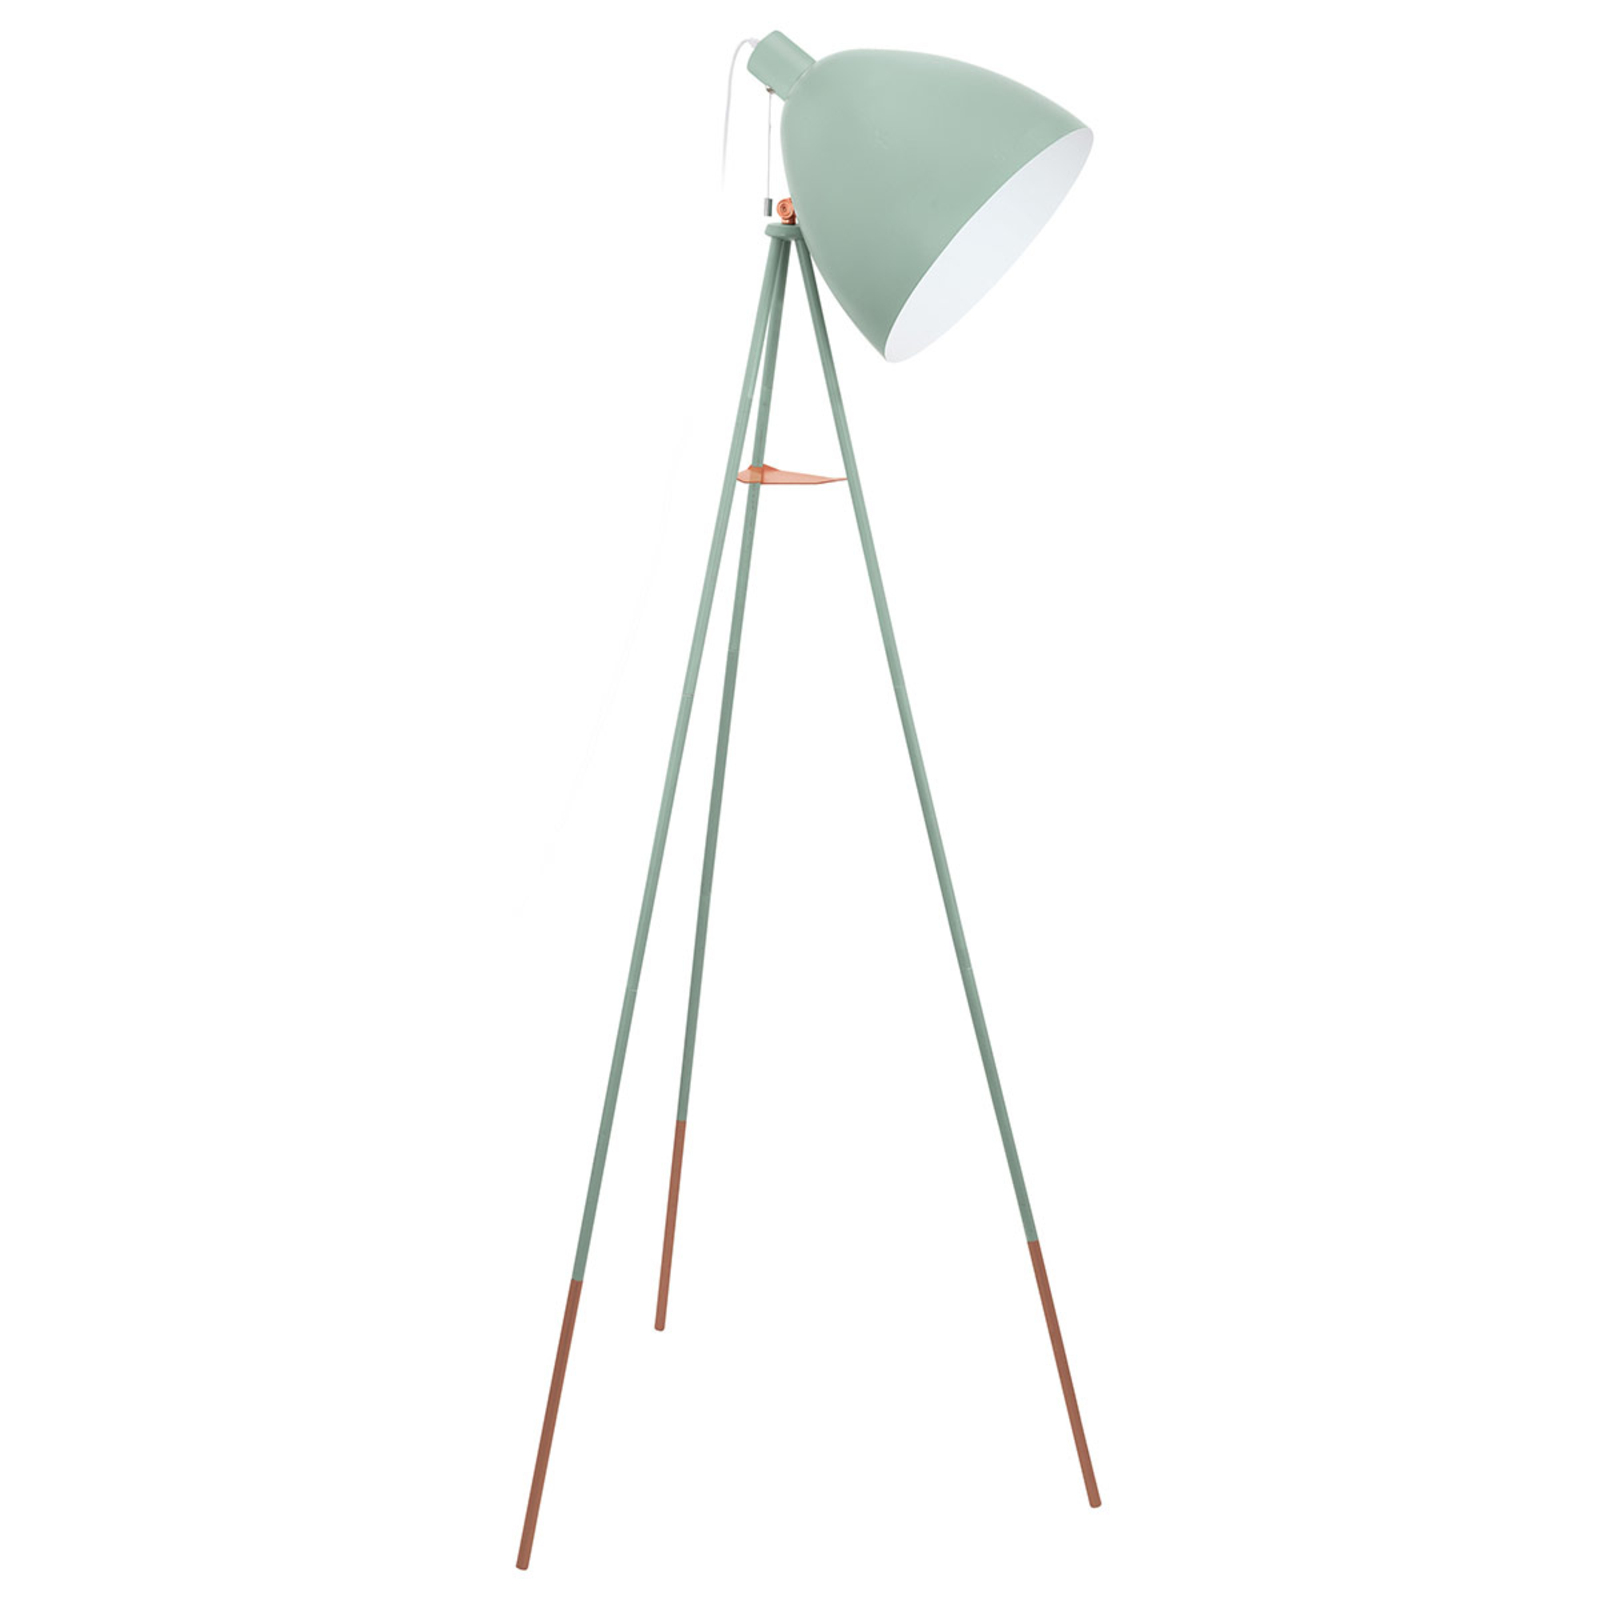 Dundee floor lamp in a retro look, mint green